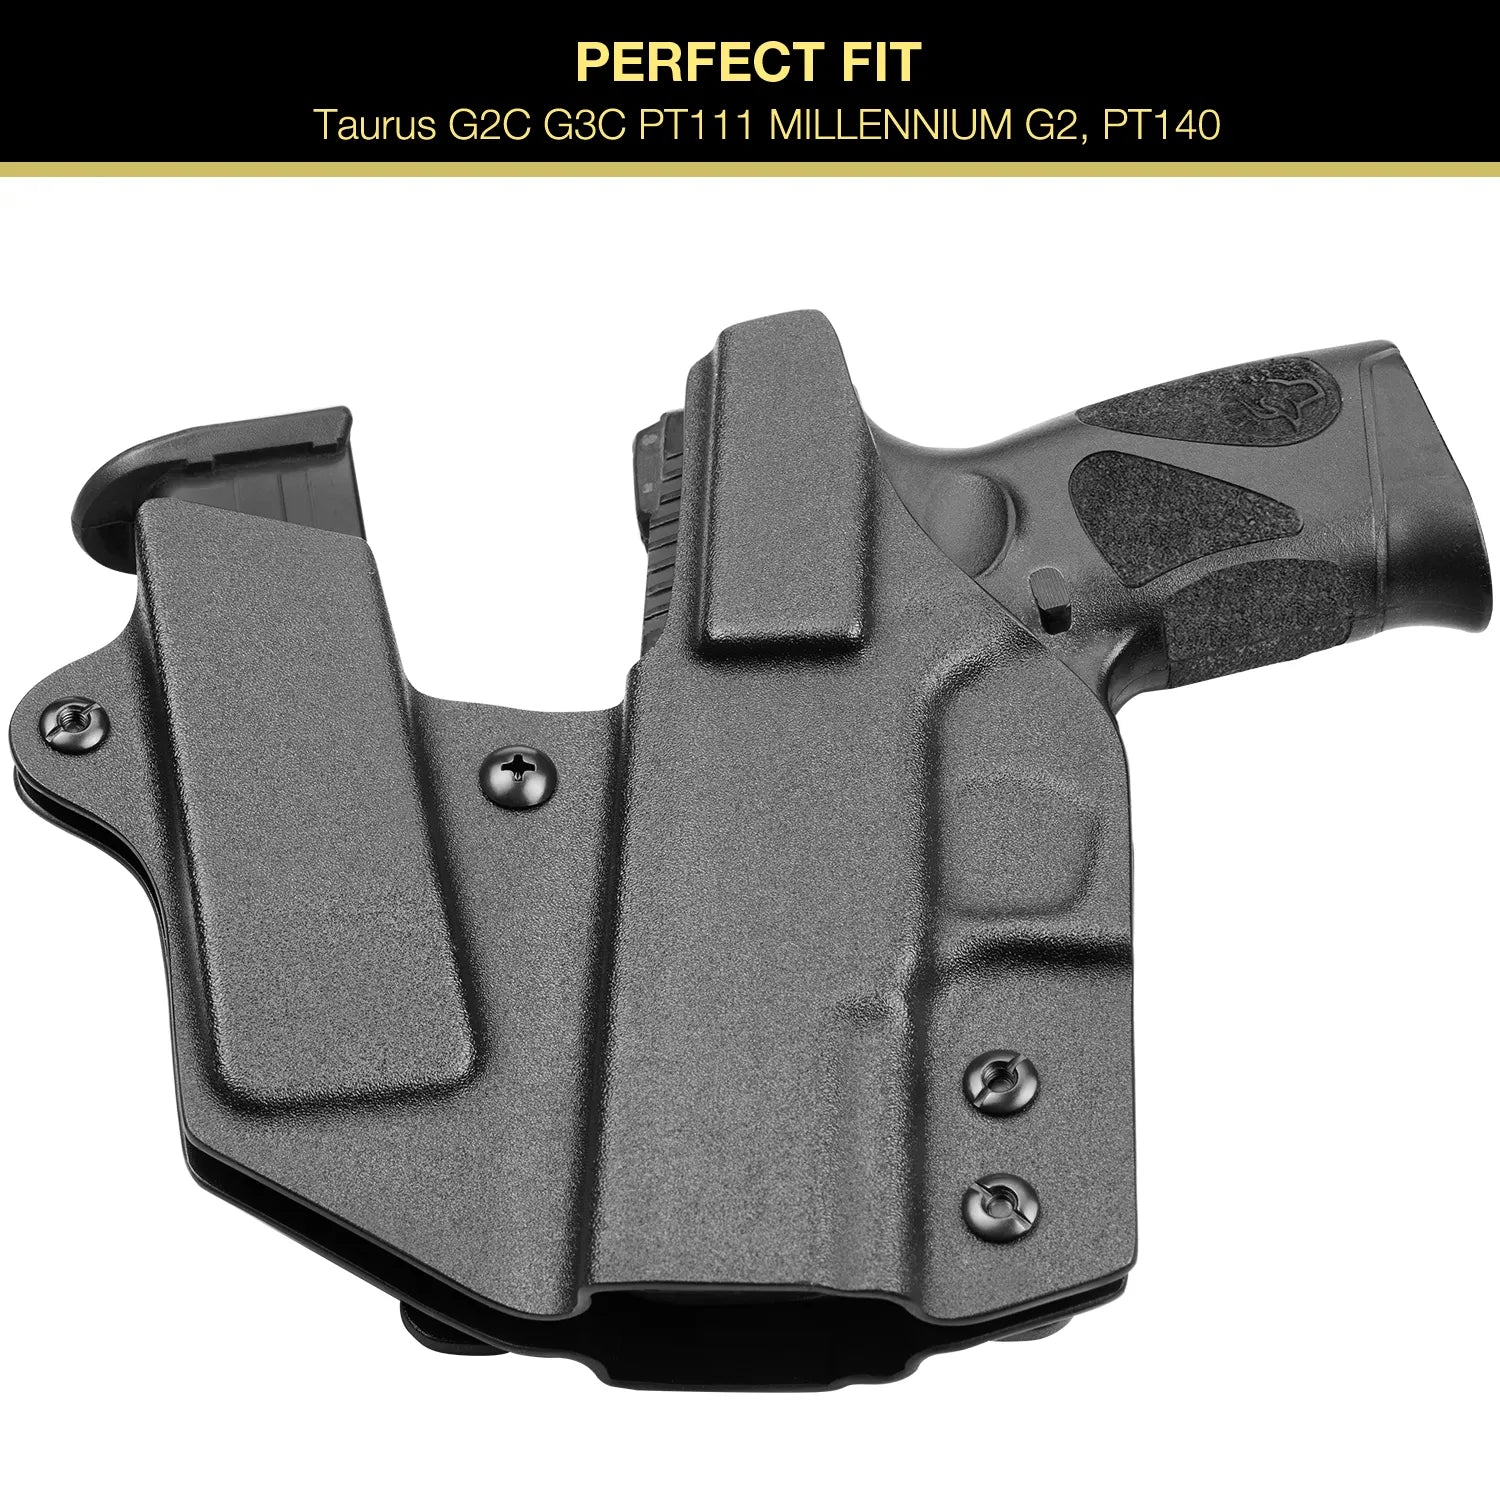 Kydex Holster Fit for taurus G2C/G3C Or G19 G17 wit Magazine Pouch